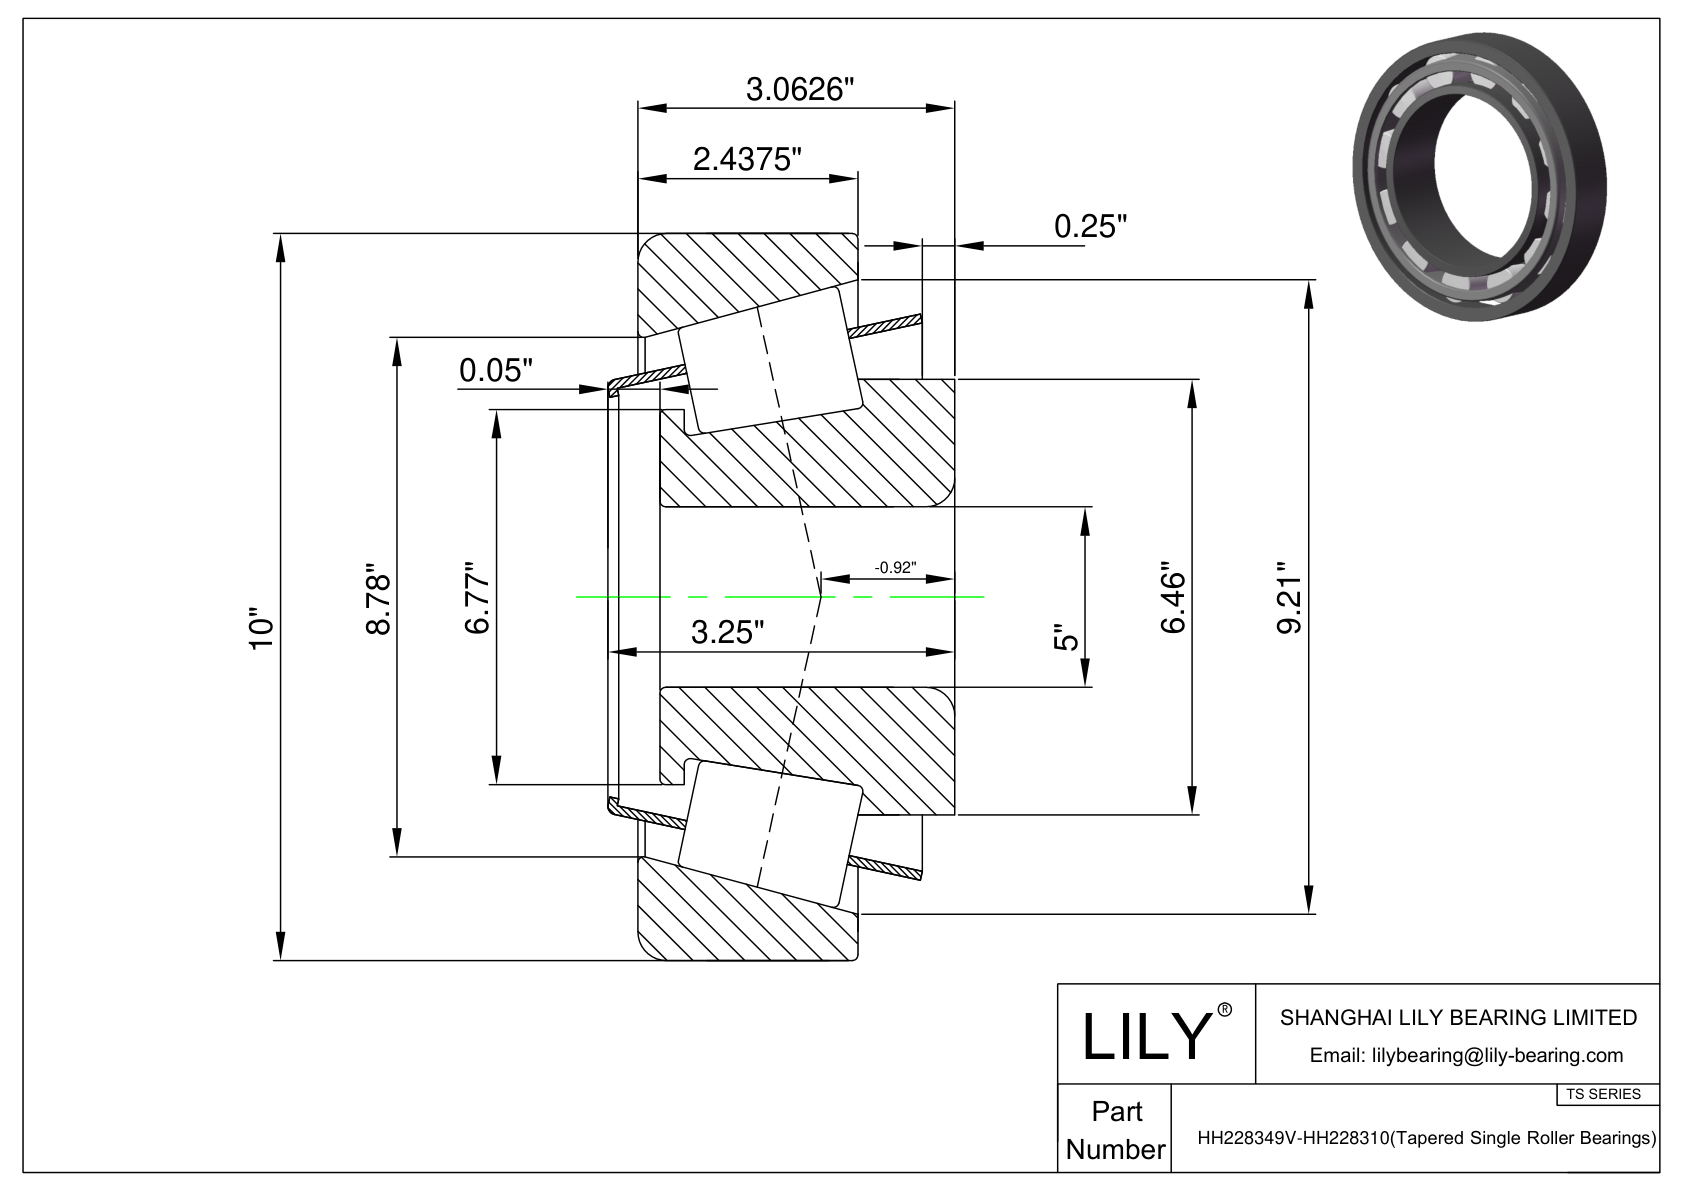 HH228349V-HH228310 TS (Tapered Single Roller Bearings) (Imperial) cad drawing